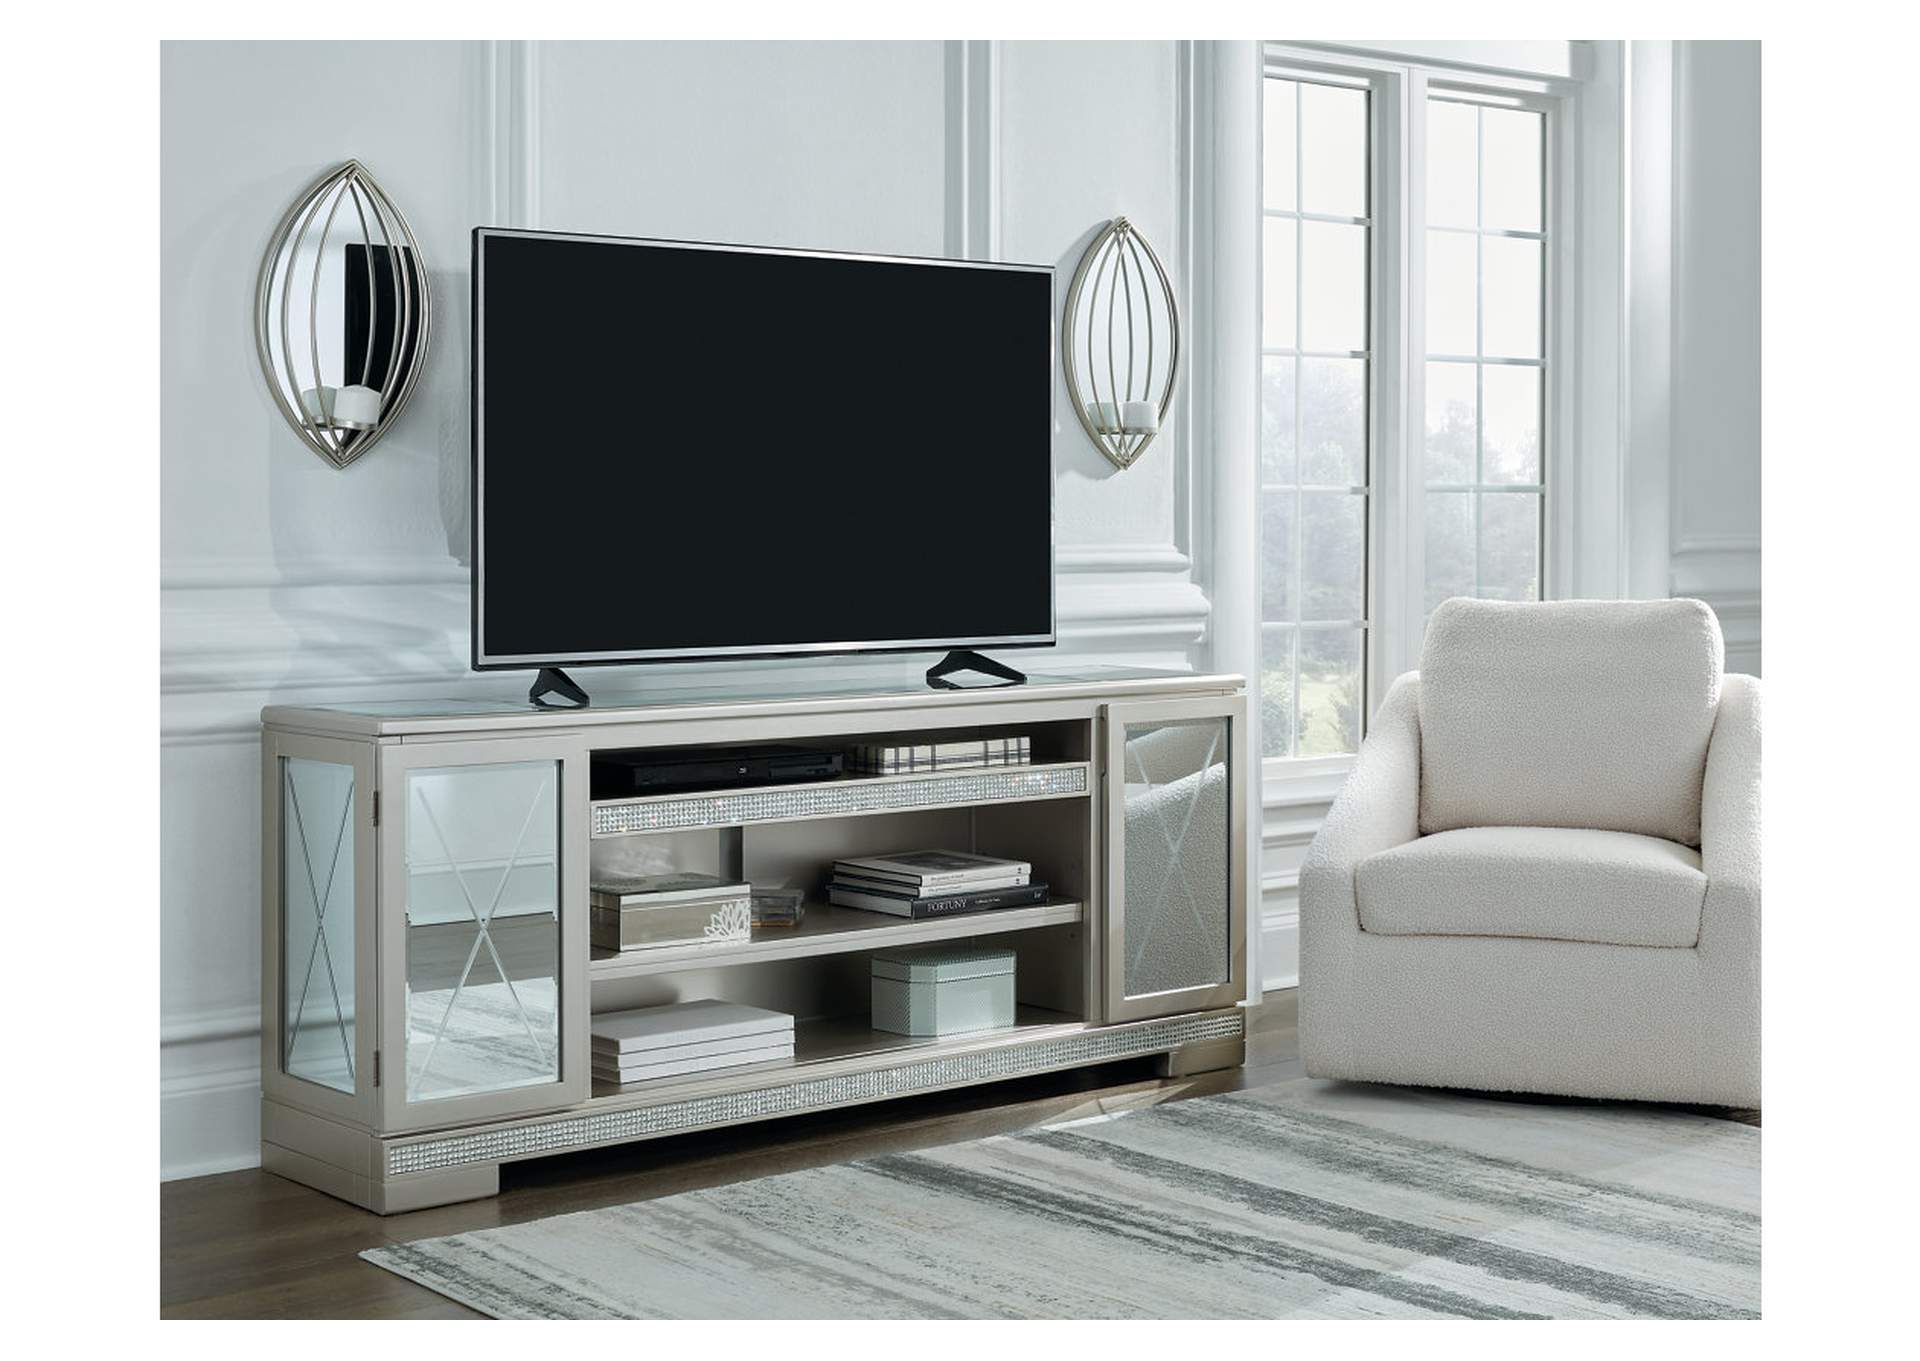 Flamory 72" TV Stand,Signature Design By Ashley